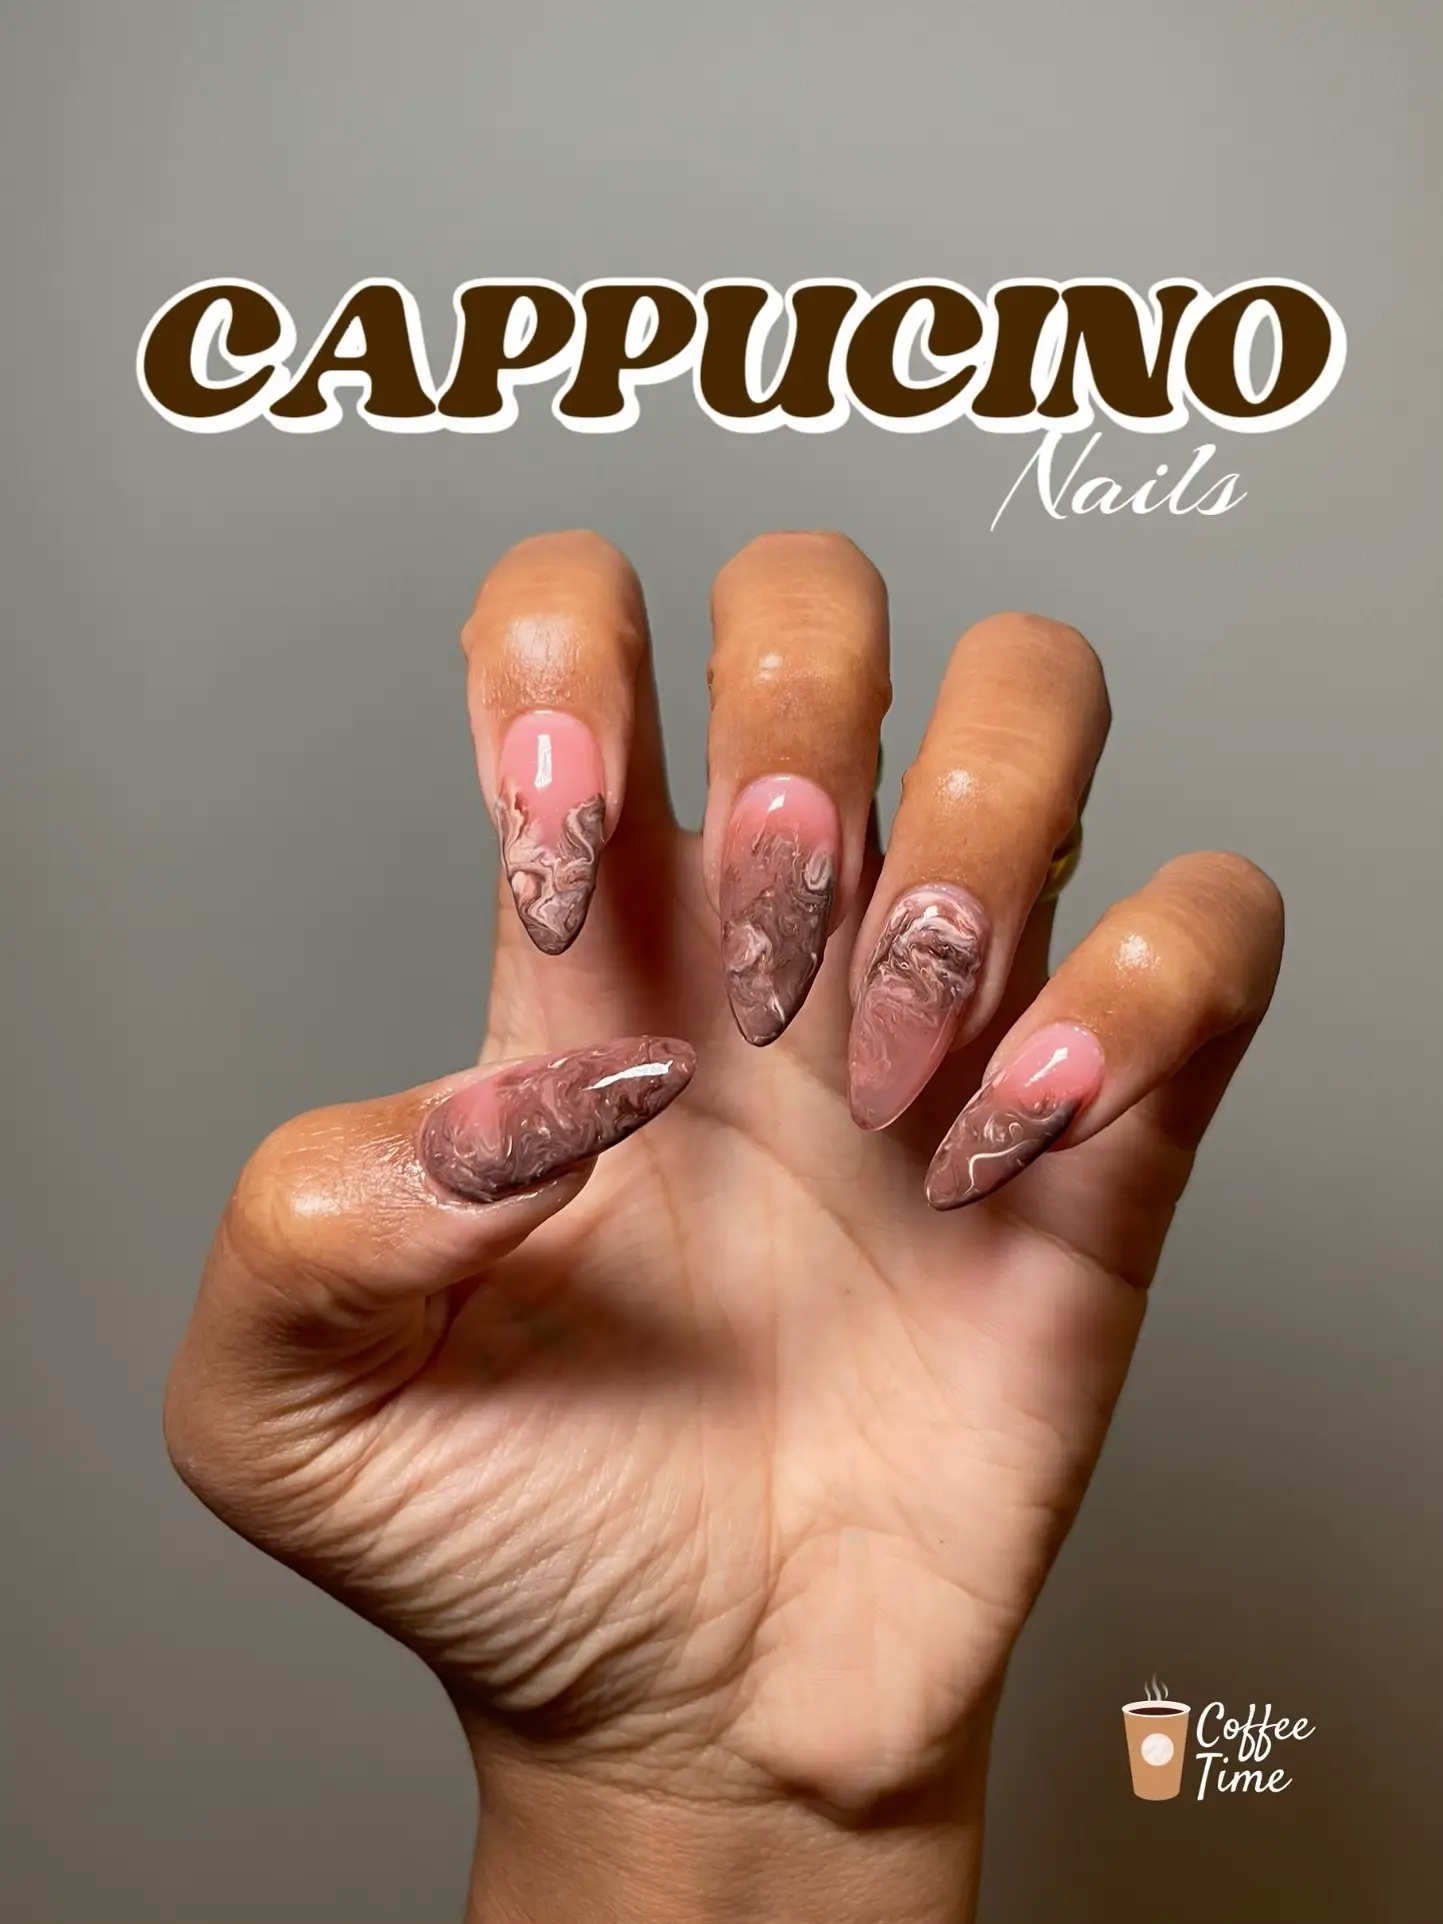 CAPPUCCINO NAILS ☕️ 's images